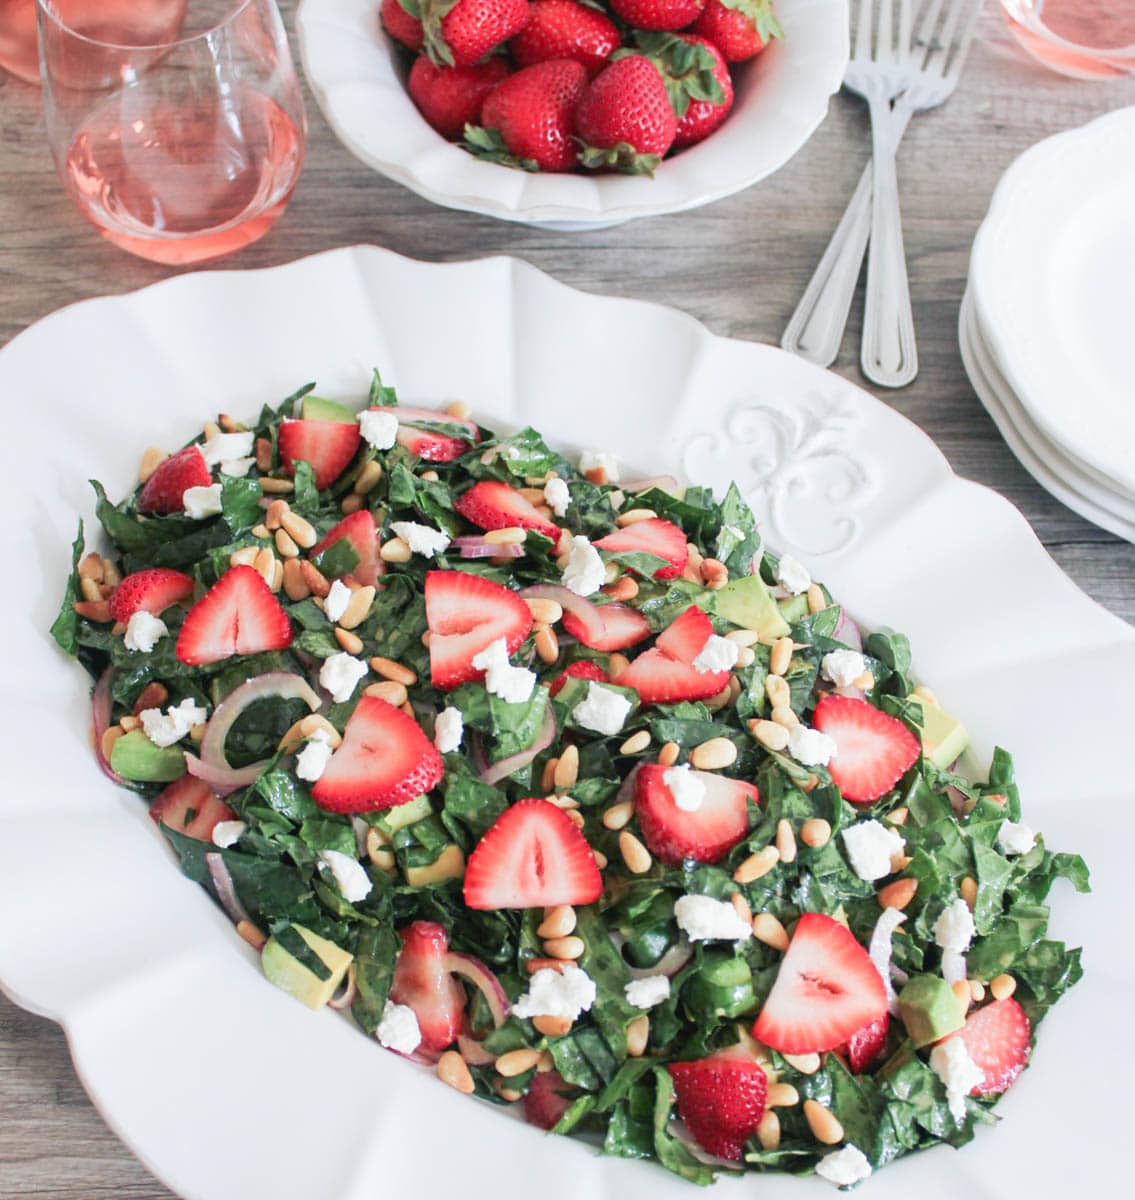 Summer-Kale-Salad-with-Strawberries-Avocado-Pine-Nuts-and-Goat-Cheese-8